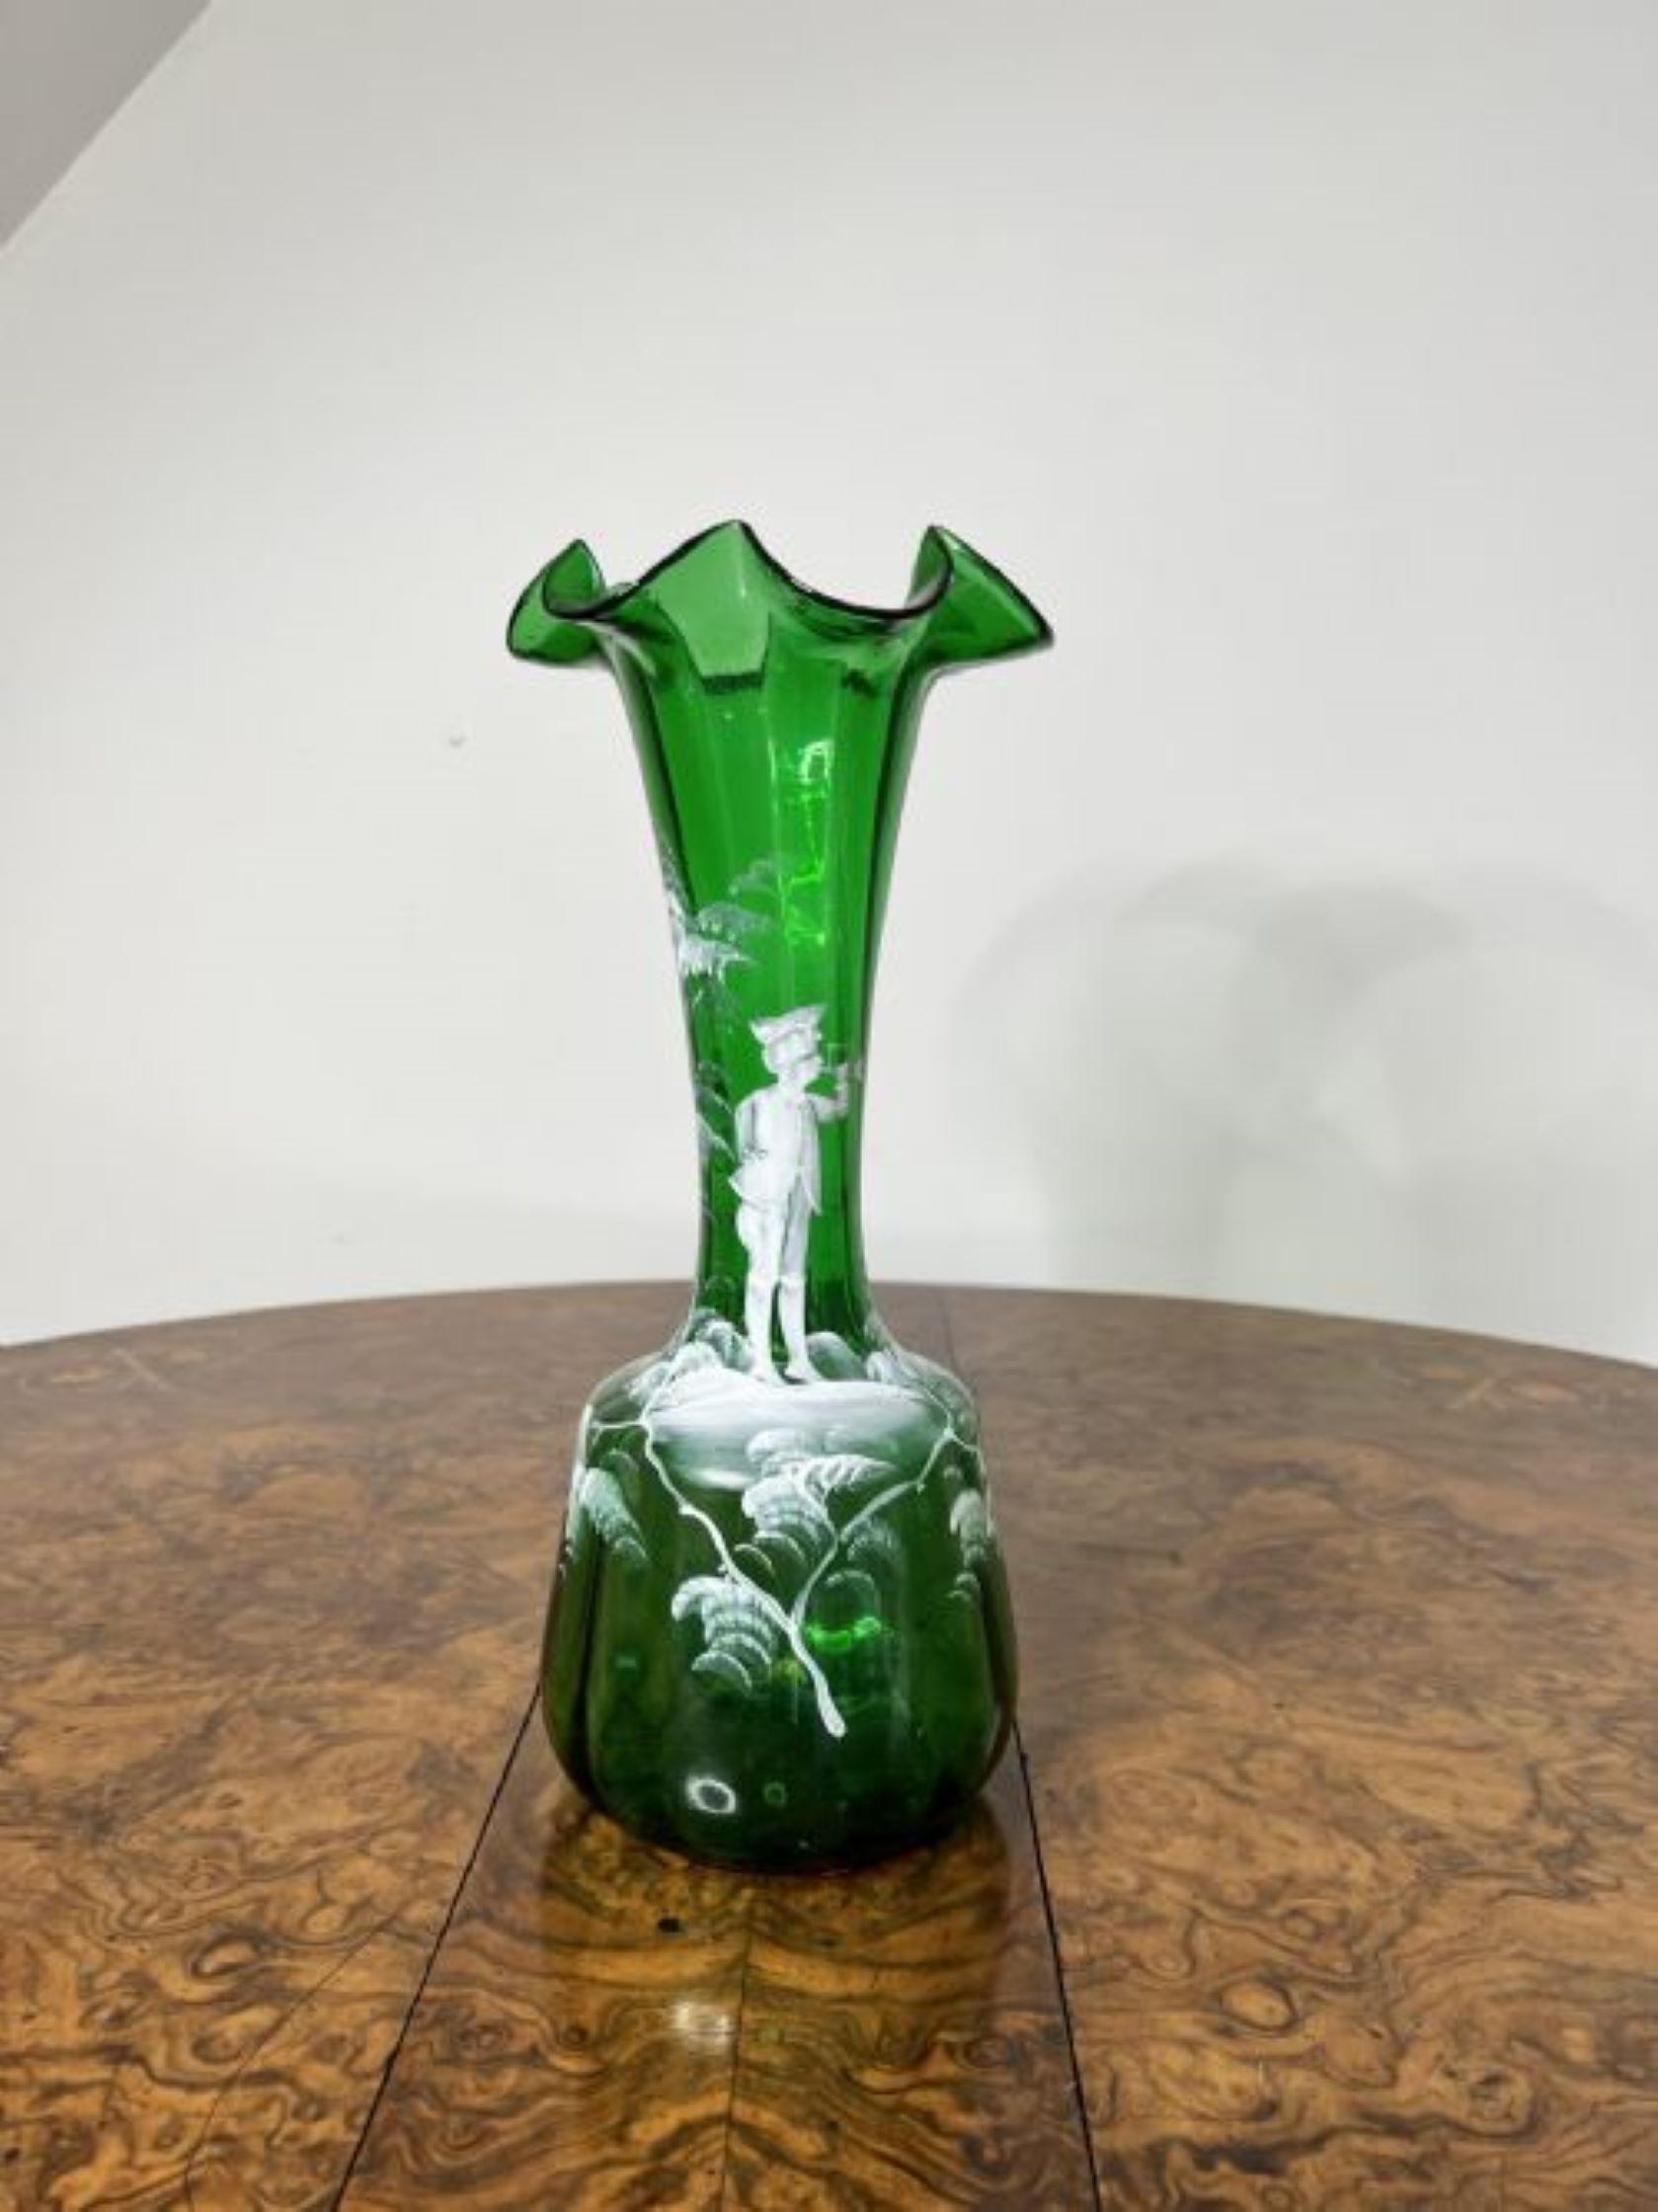 Stunning quality pair of antique Victorian Mary Gregory vases having a quality pair of Mary Gregory green glass vases having quality wavy shaped tops, decorated with white enamel decoration of a boy playing an instrument surrounded by trees and